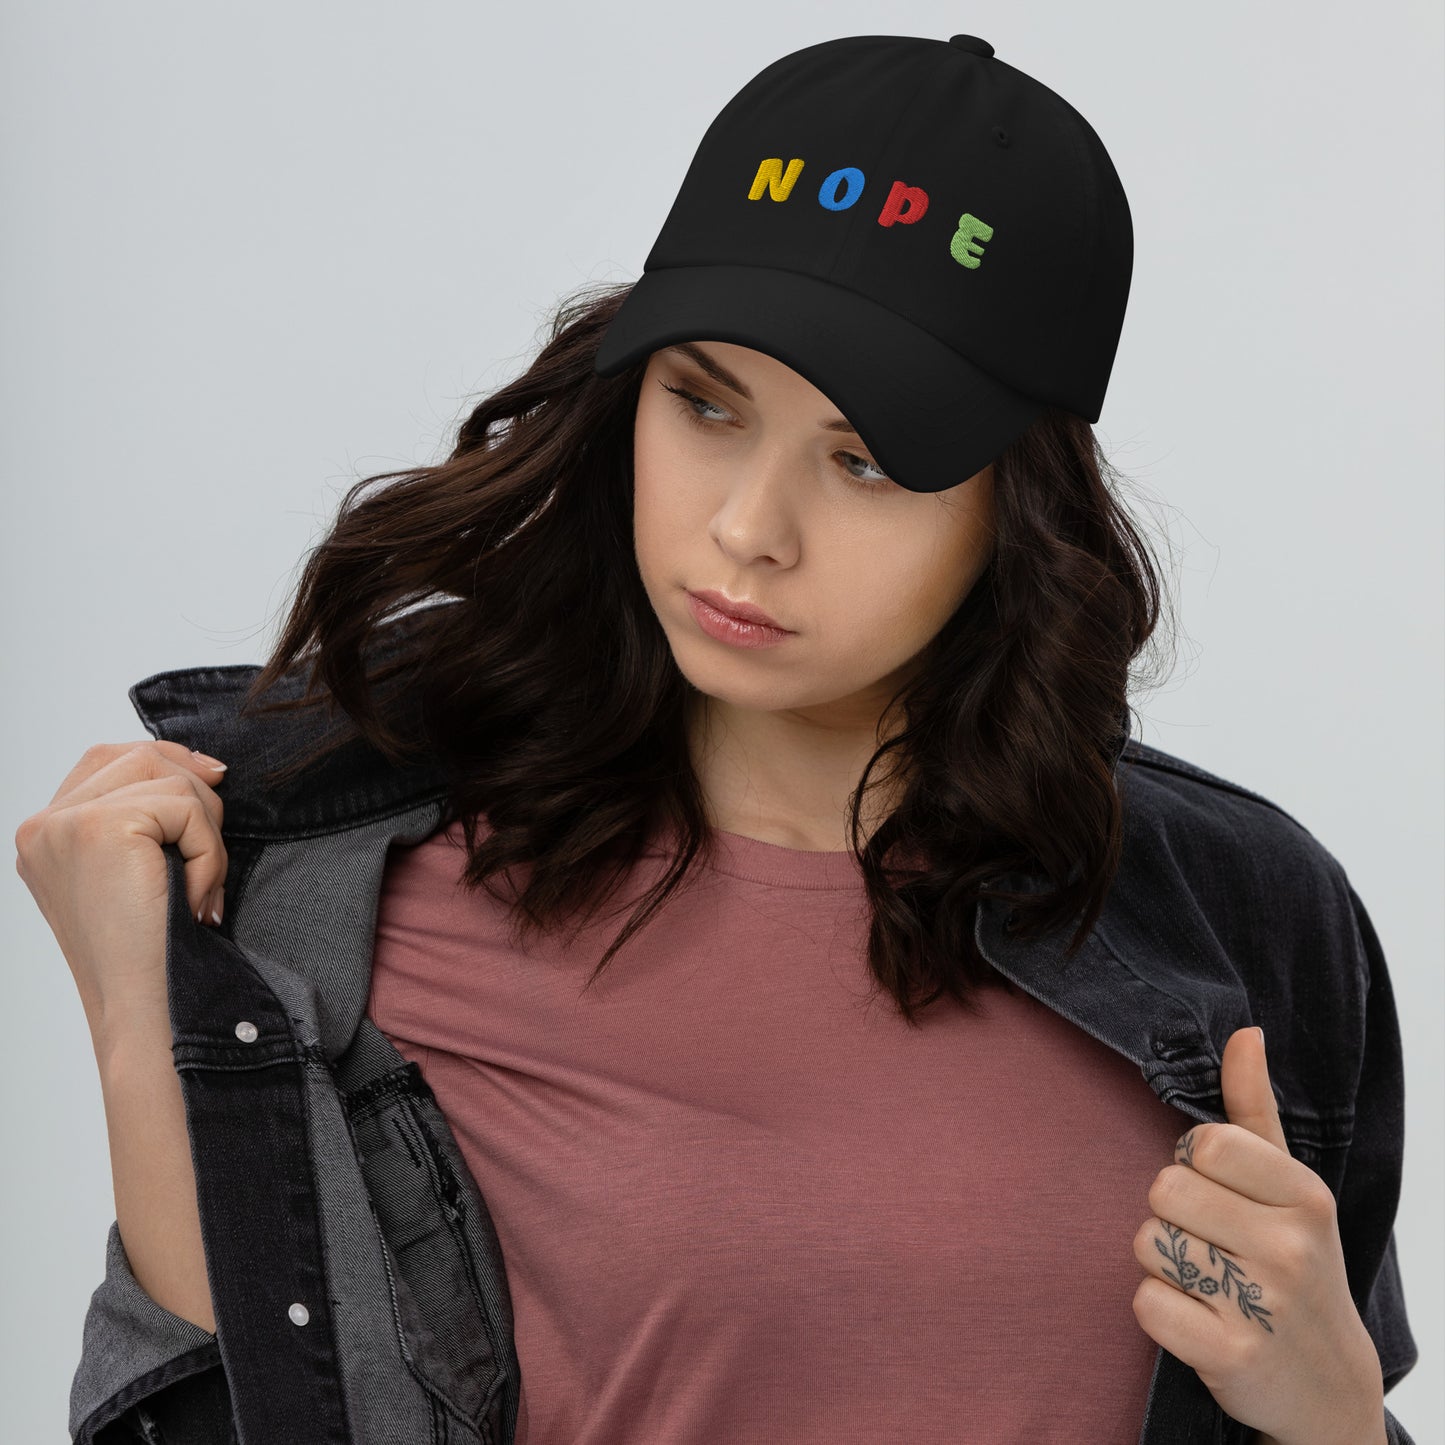 lady wearing black hat with "NOPE" written on front